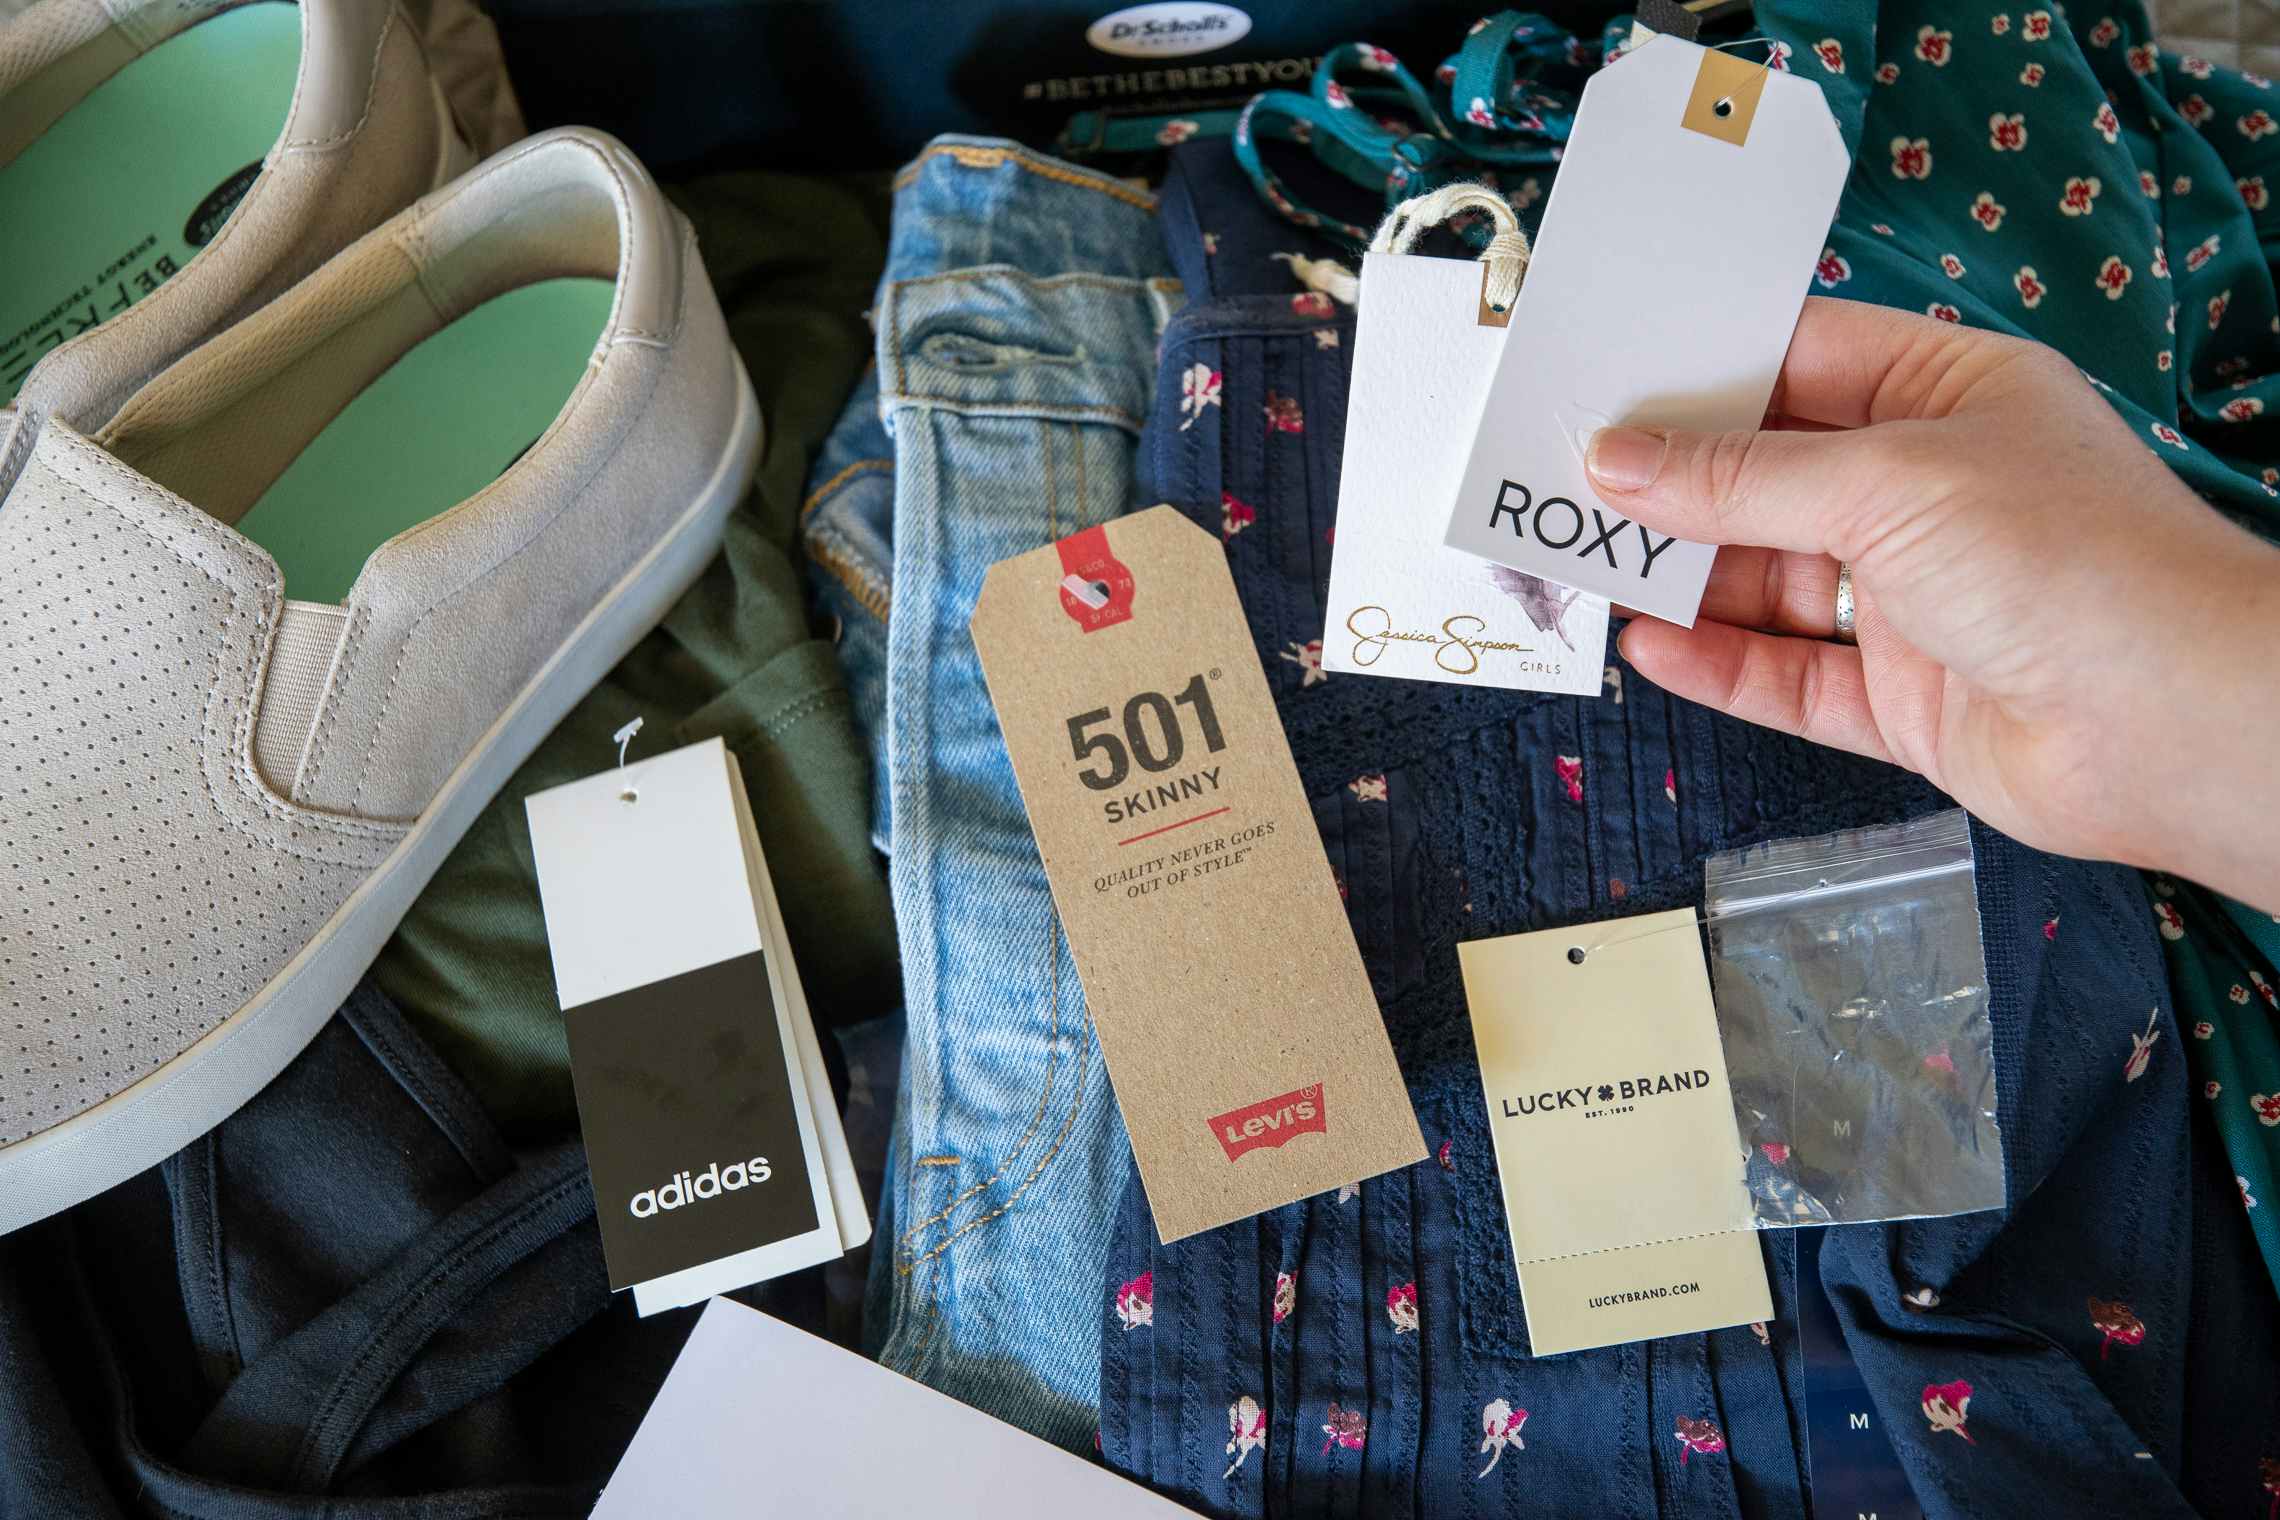 Name brand clothing tags attached to items of clothing